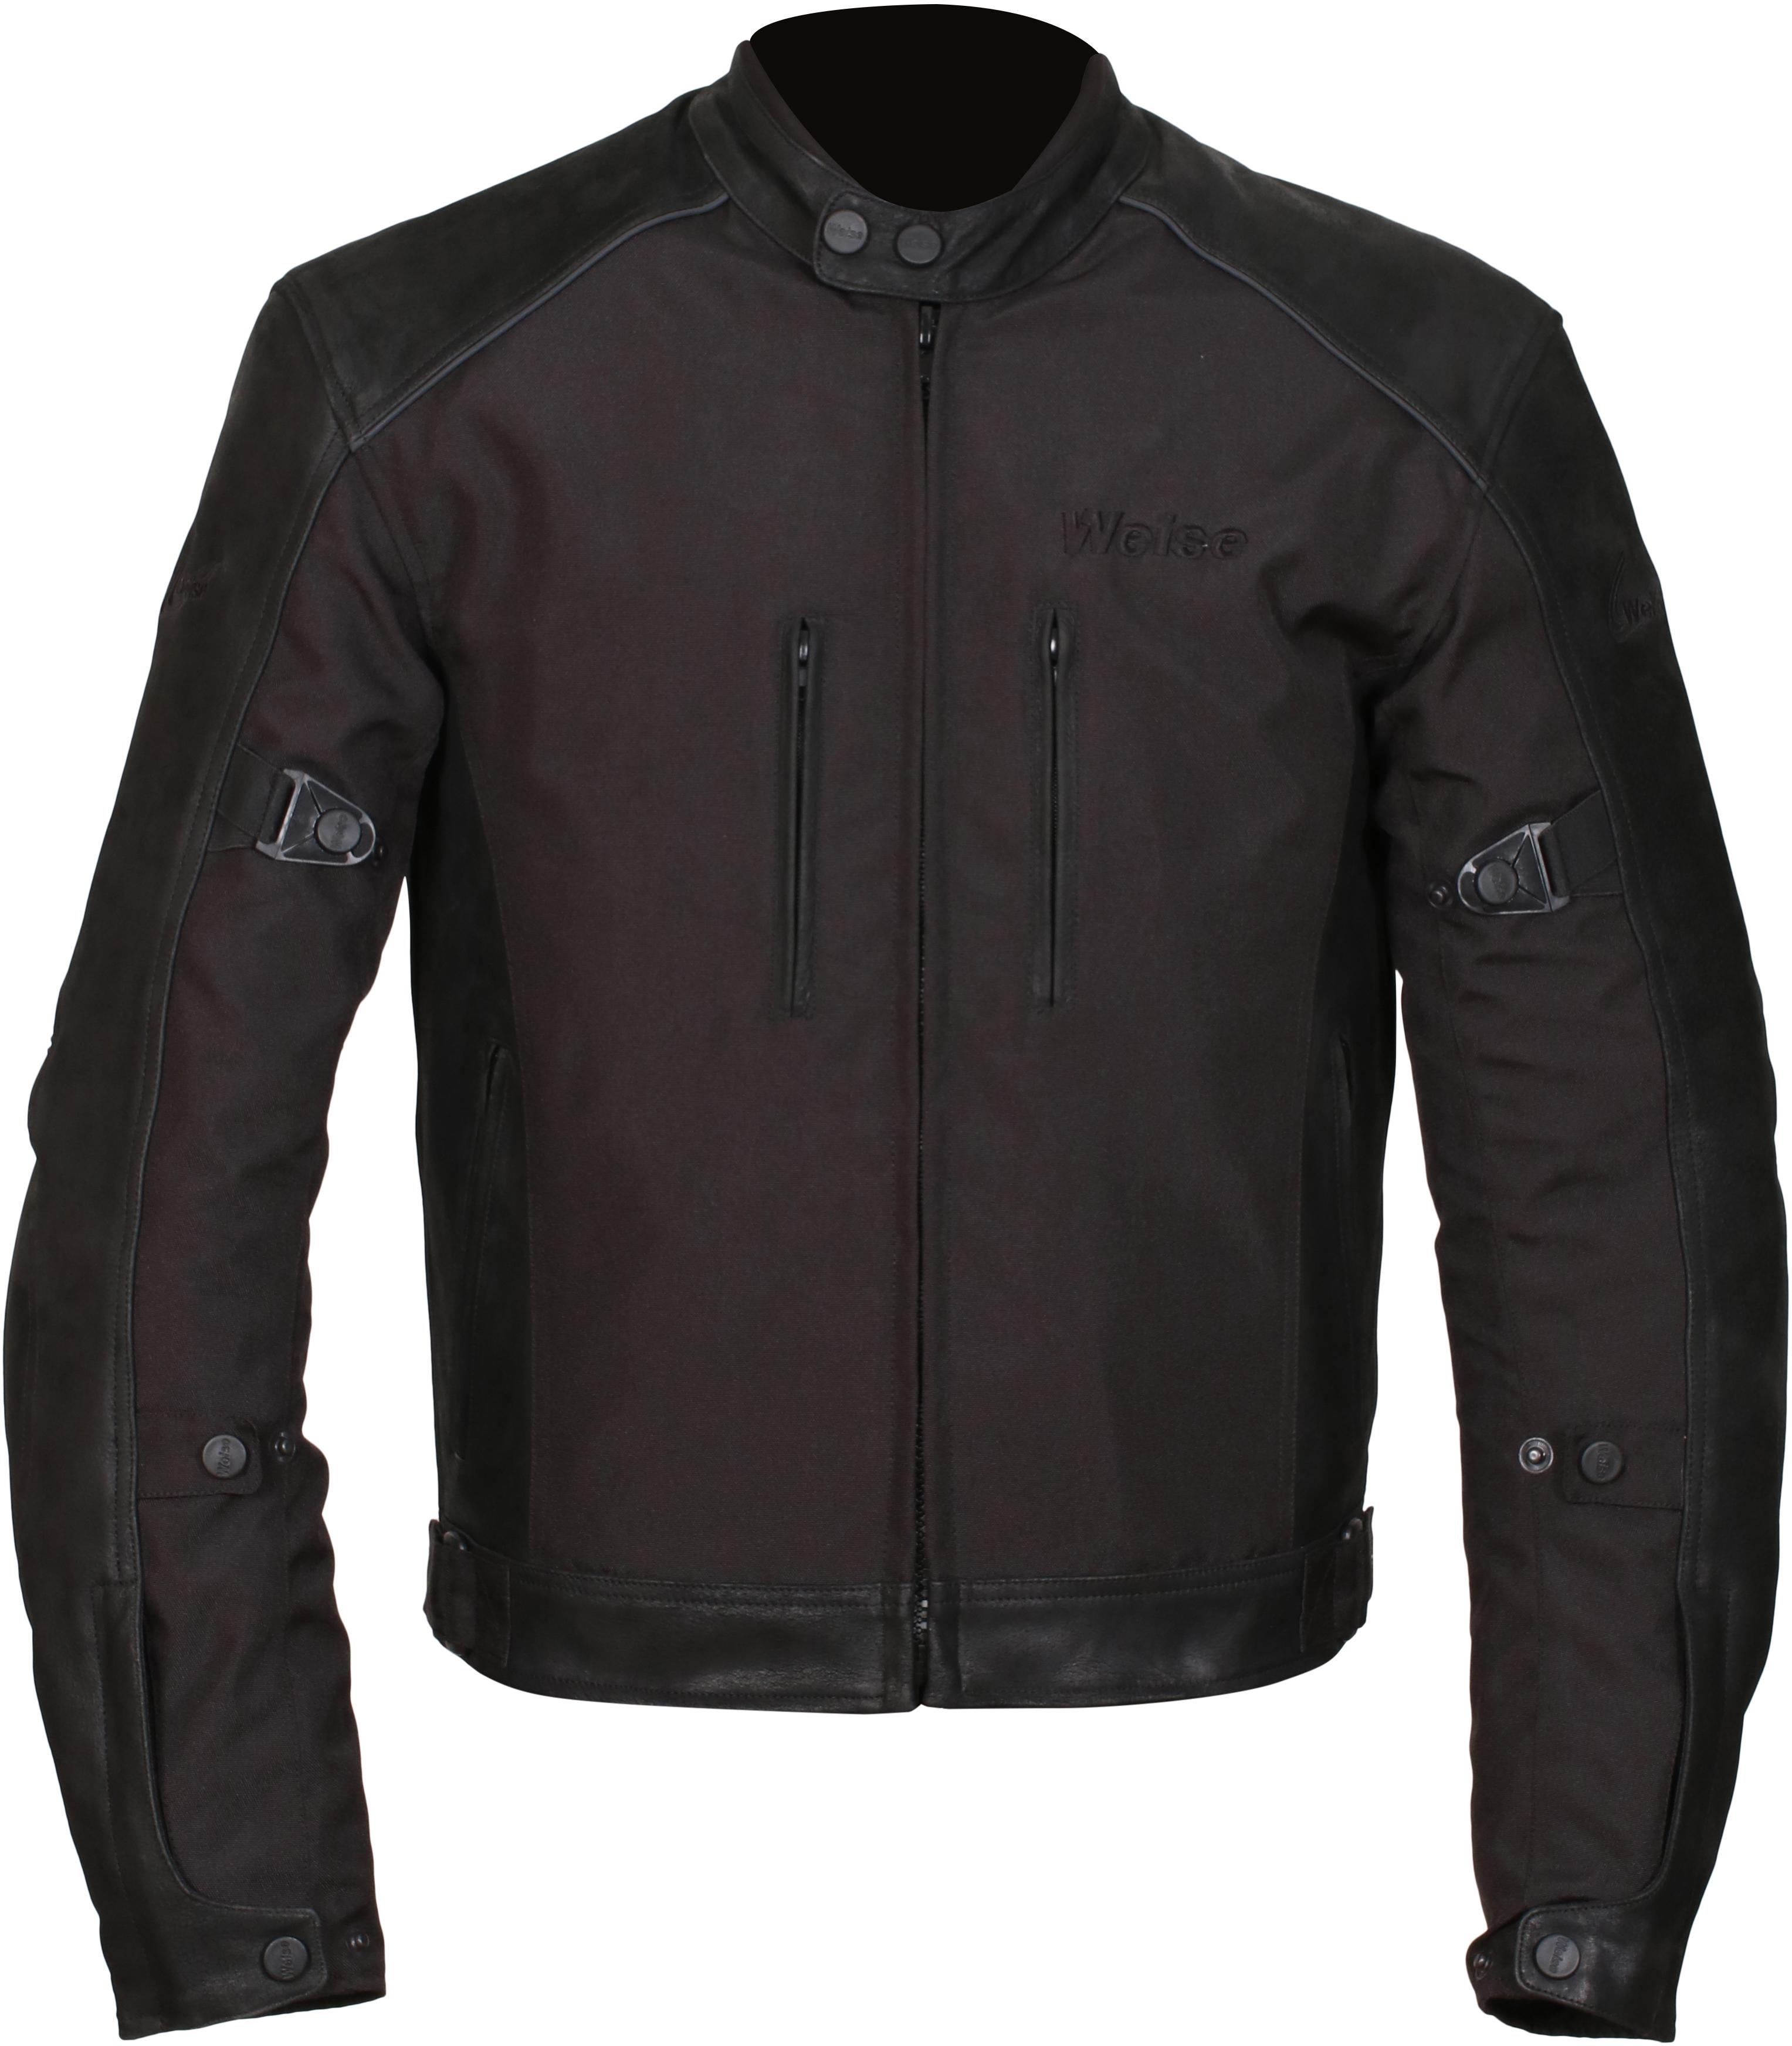 Weise Mission Motorcycle Jacket - Black, 5Xl